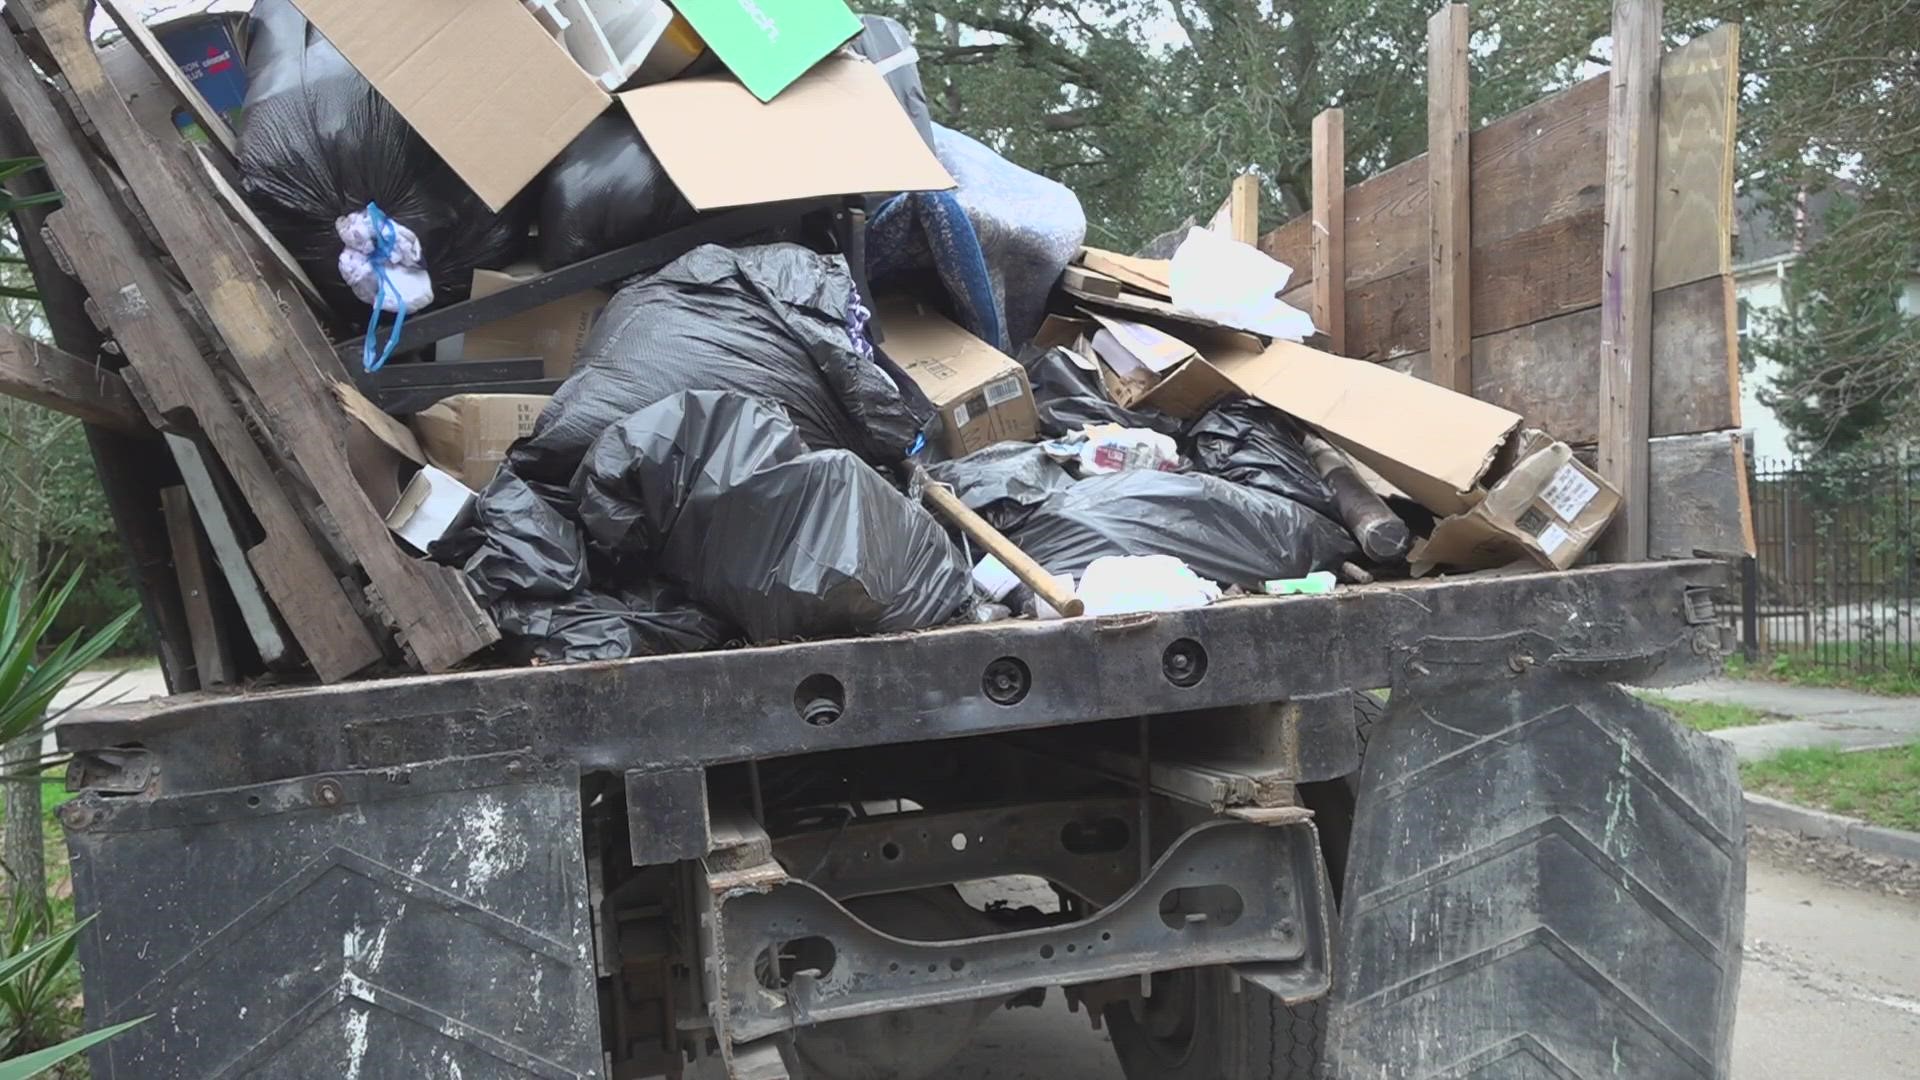 One resident said the truck has been parked on Fern Street for several weeks, and now it’s becoming a dumpster of sorts alongside a major construction zone.